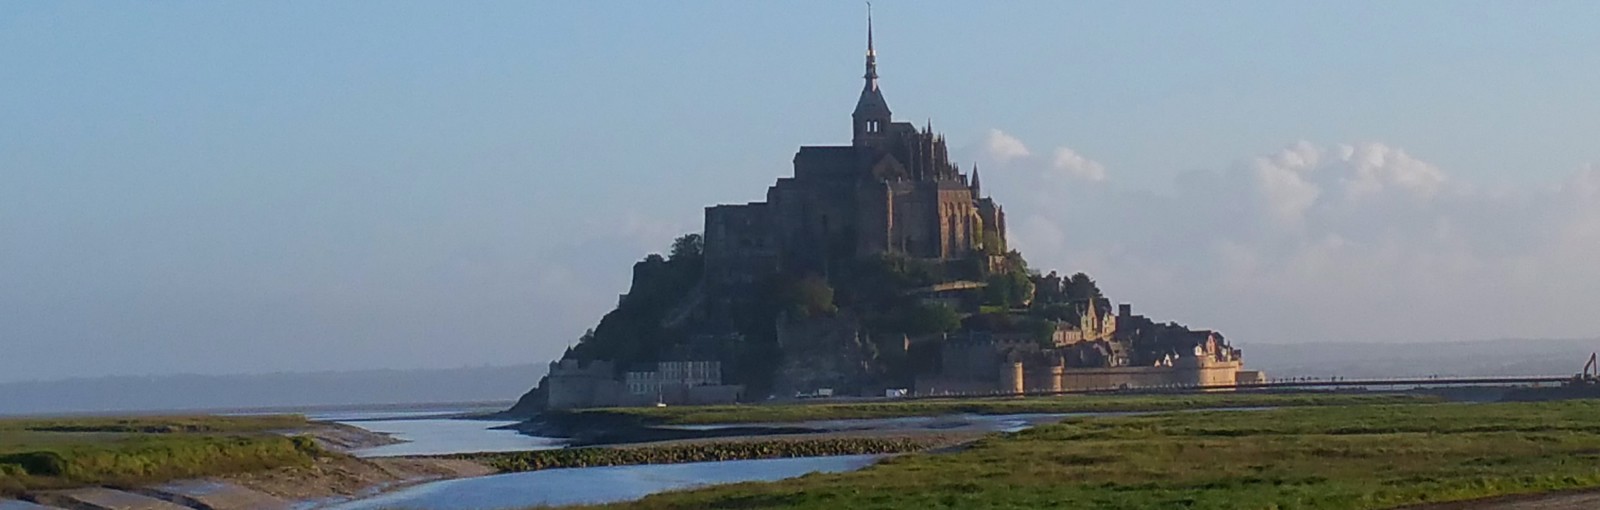 Tours Normandy, Mont-Saint-Michel, Castles of the Loire valley and Chartres - Multi-regional - Multiday tours from Paris